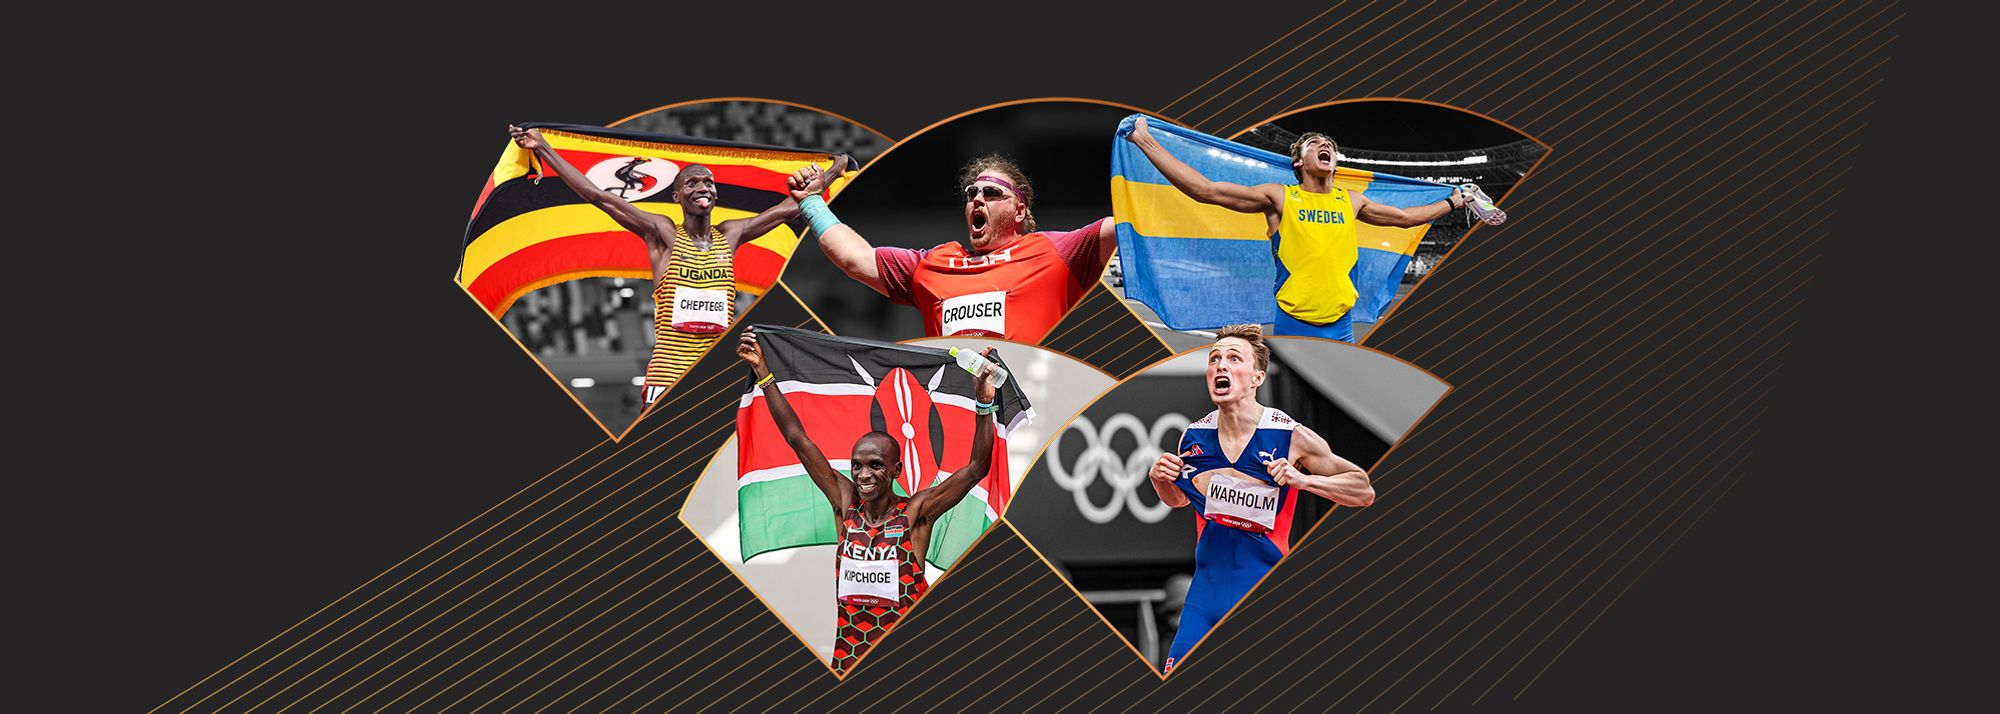 World Athletics is pleased to confirm the five finalists for Male World Athlete of the Year.